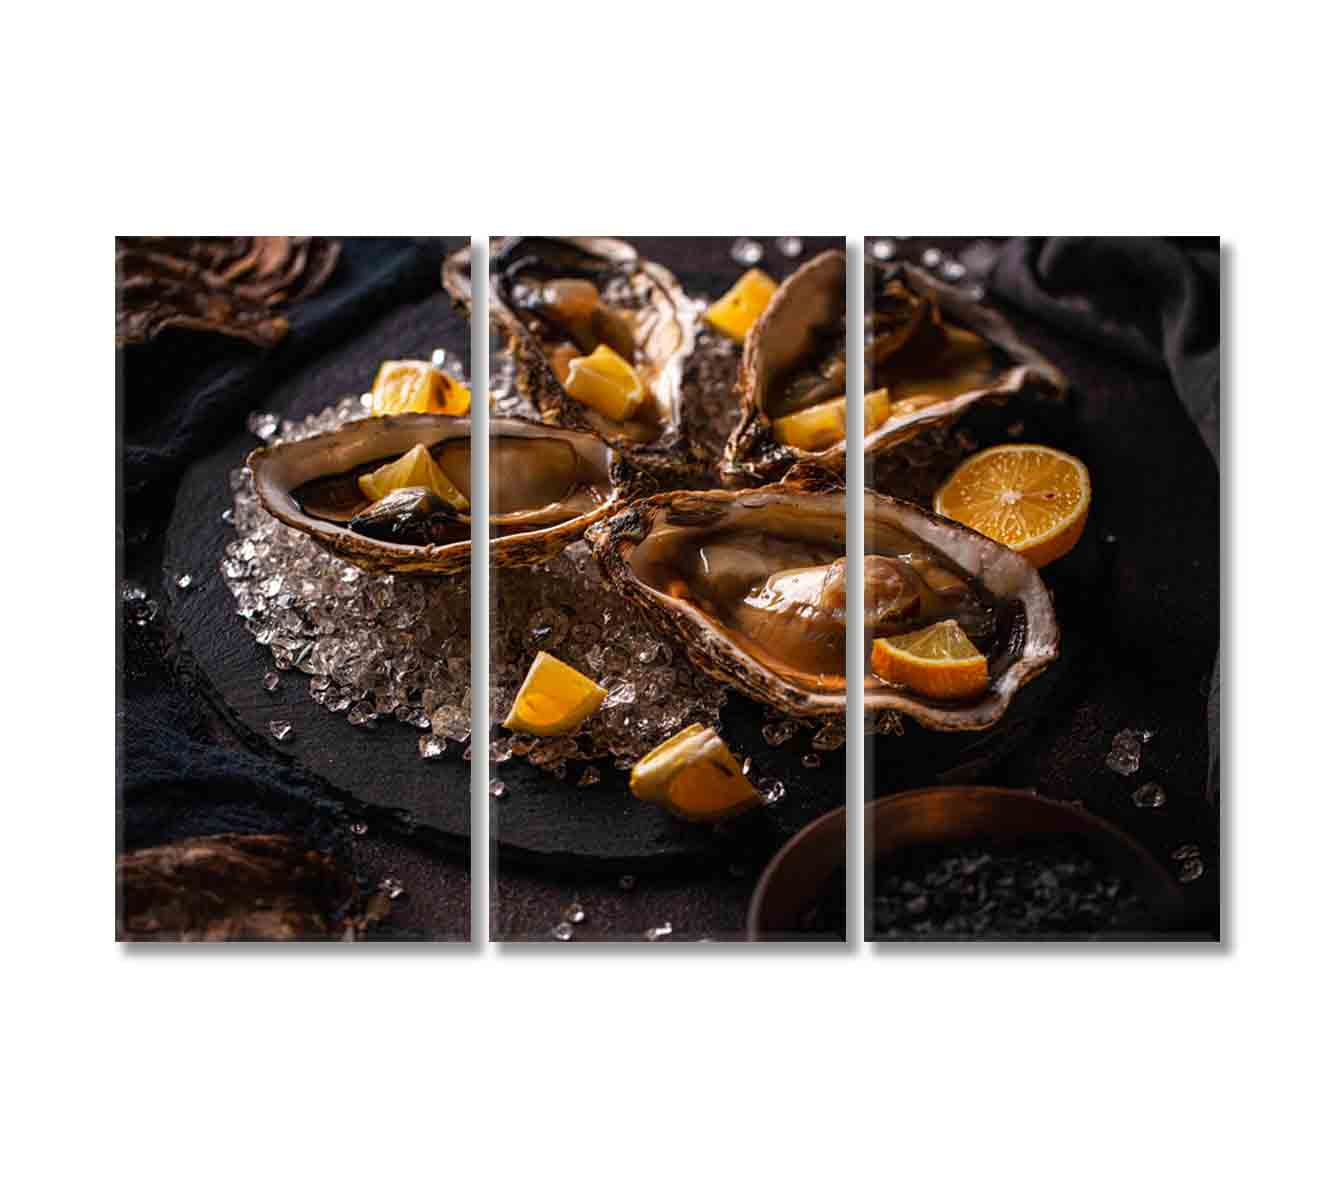 Oysters with Ice and Lemon Canvas Print-Canvas Print-CetArt-3 Panels-36x24 inches-CetArt